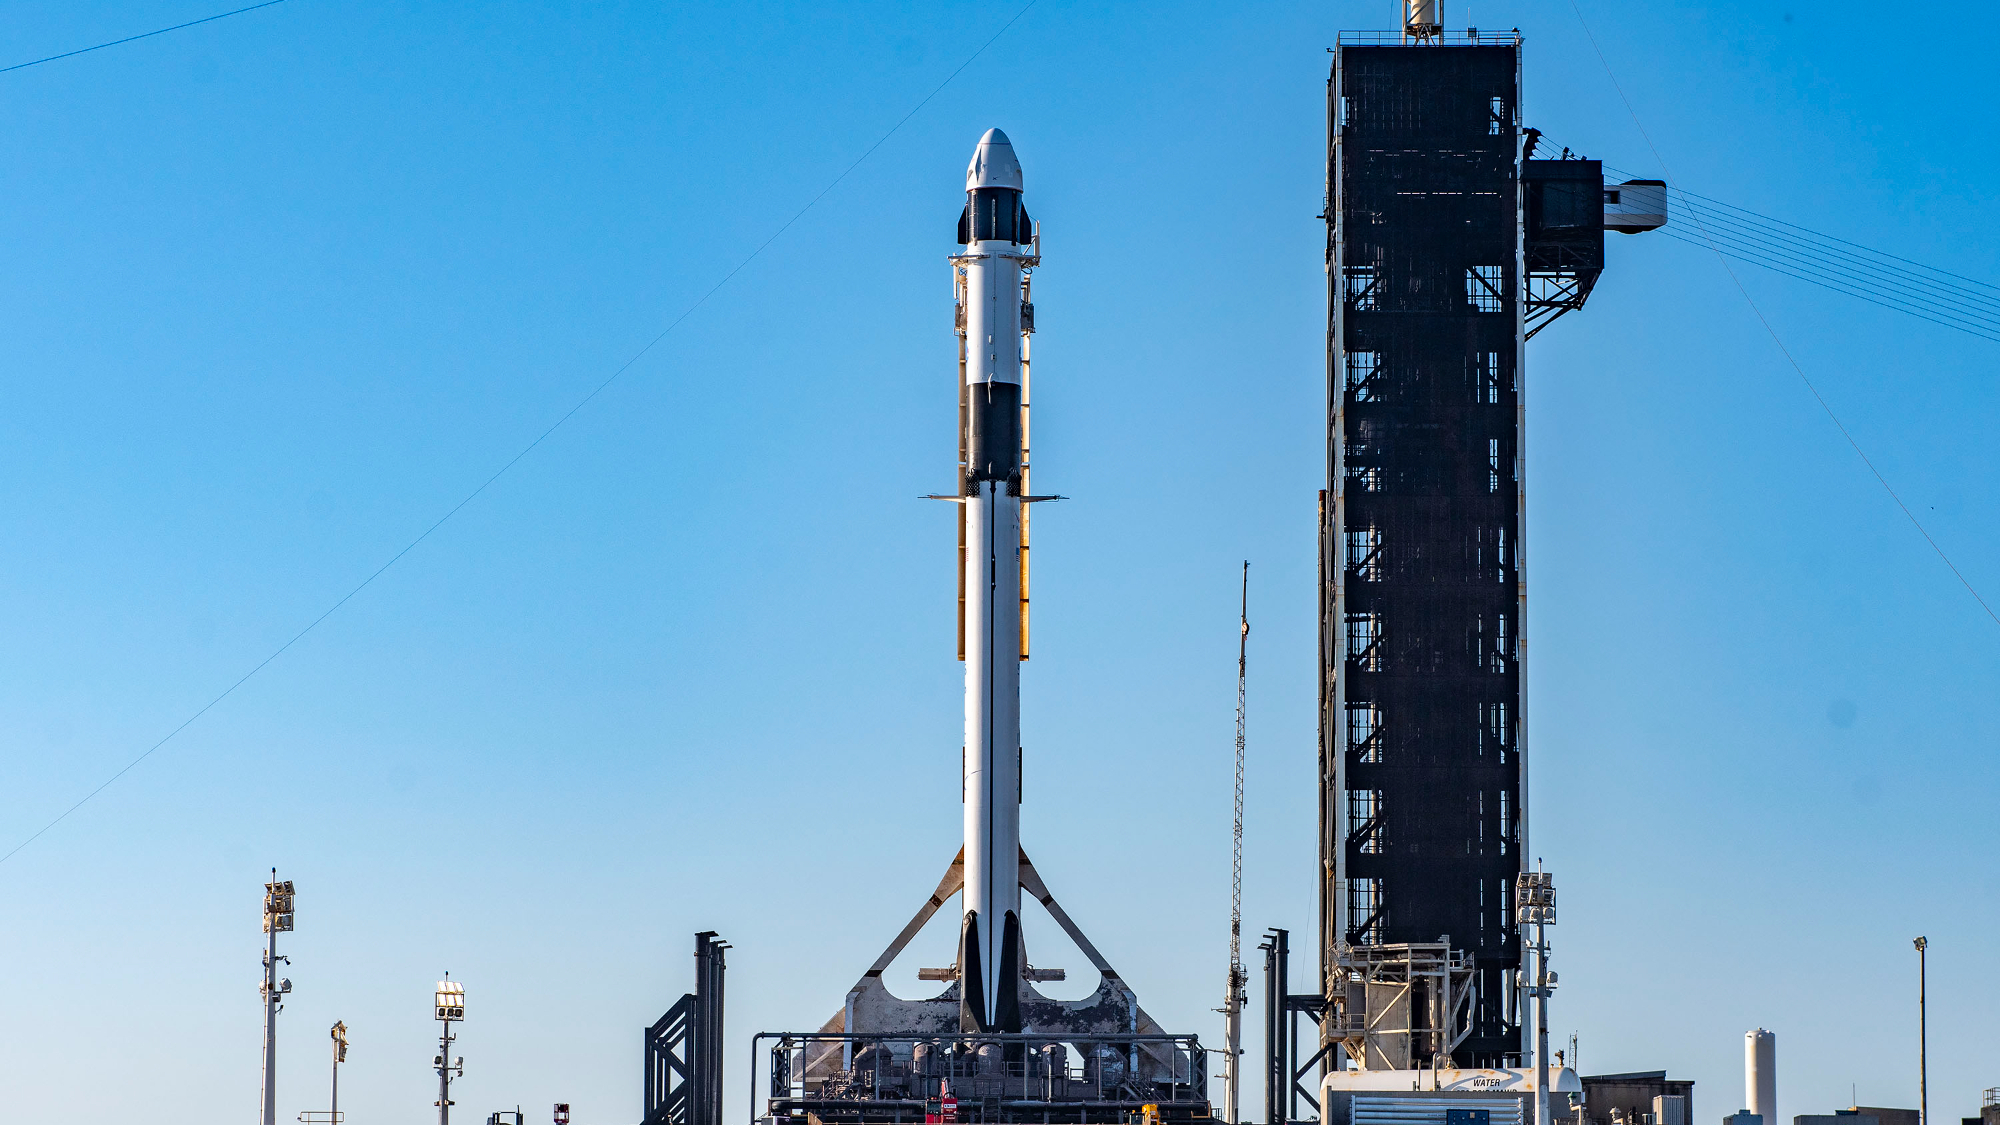 Black and white rocket topped with a white capsule stand on the launch pad with blue sky in the background.